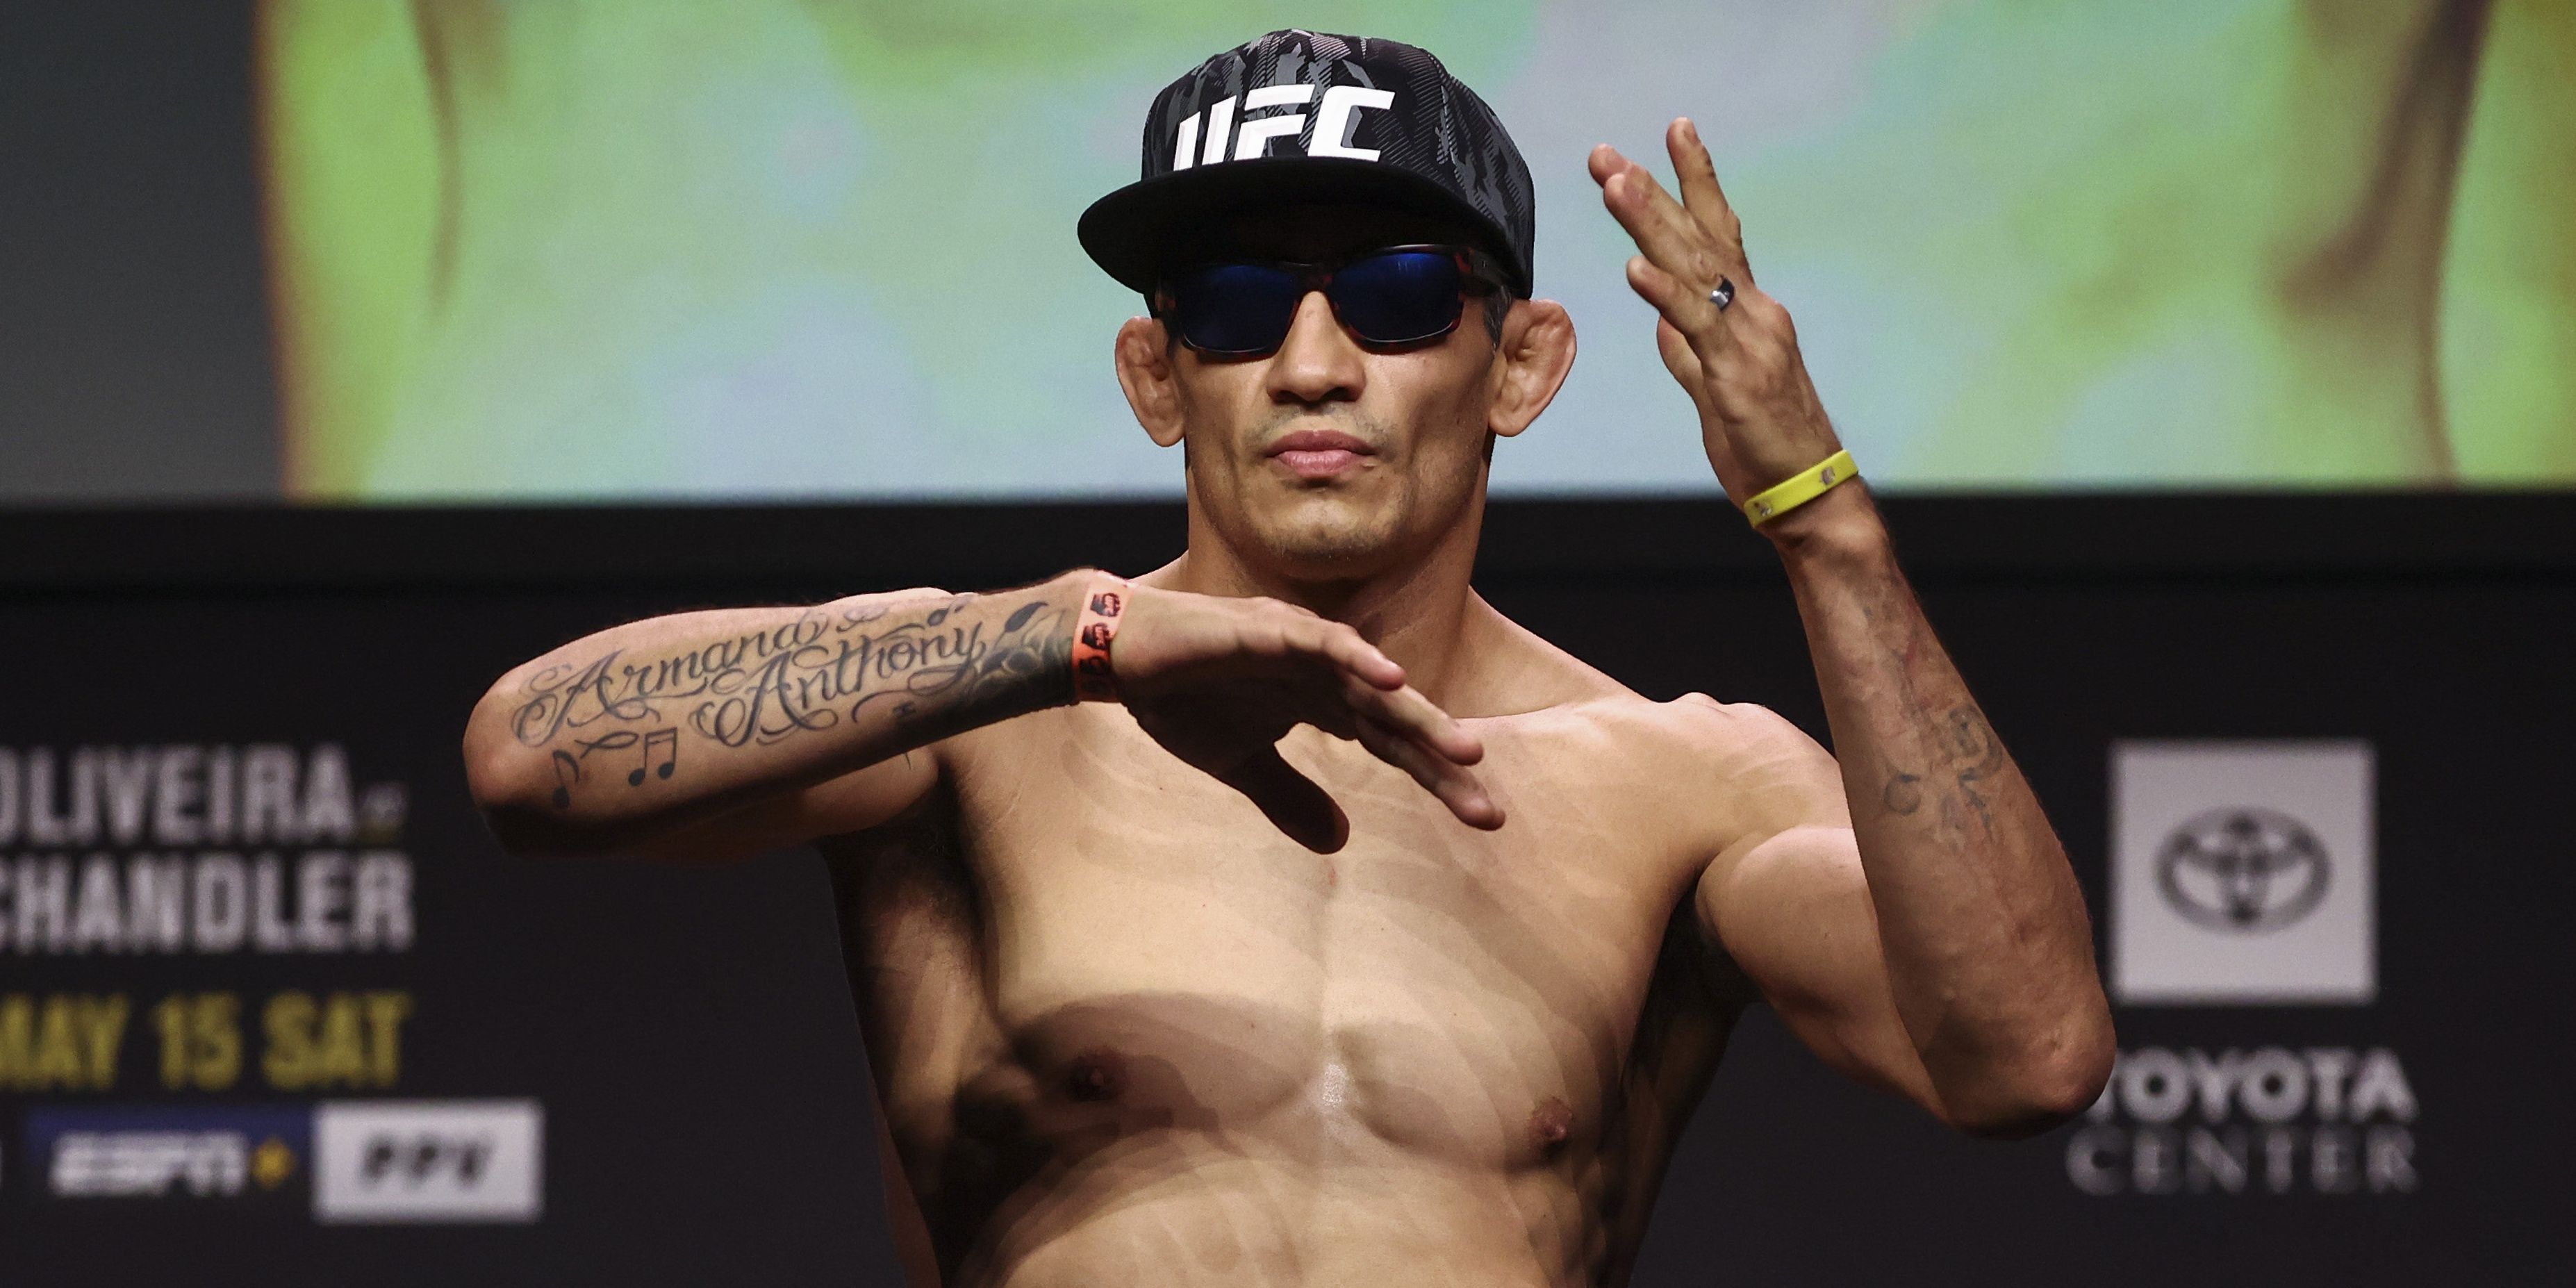 tony-ferguson-at-the-scale-with-a-hat-and-sunglasses